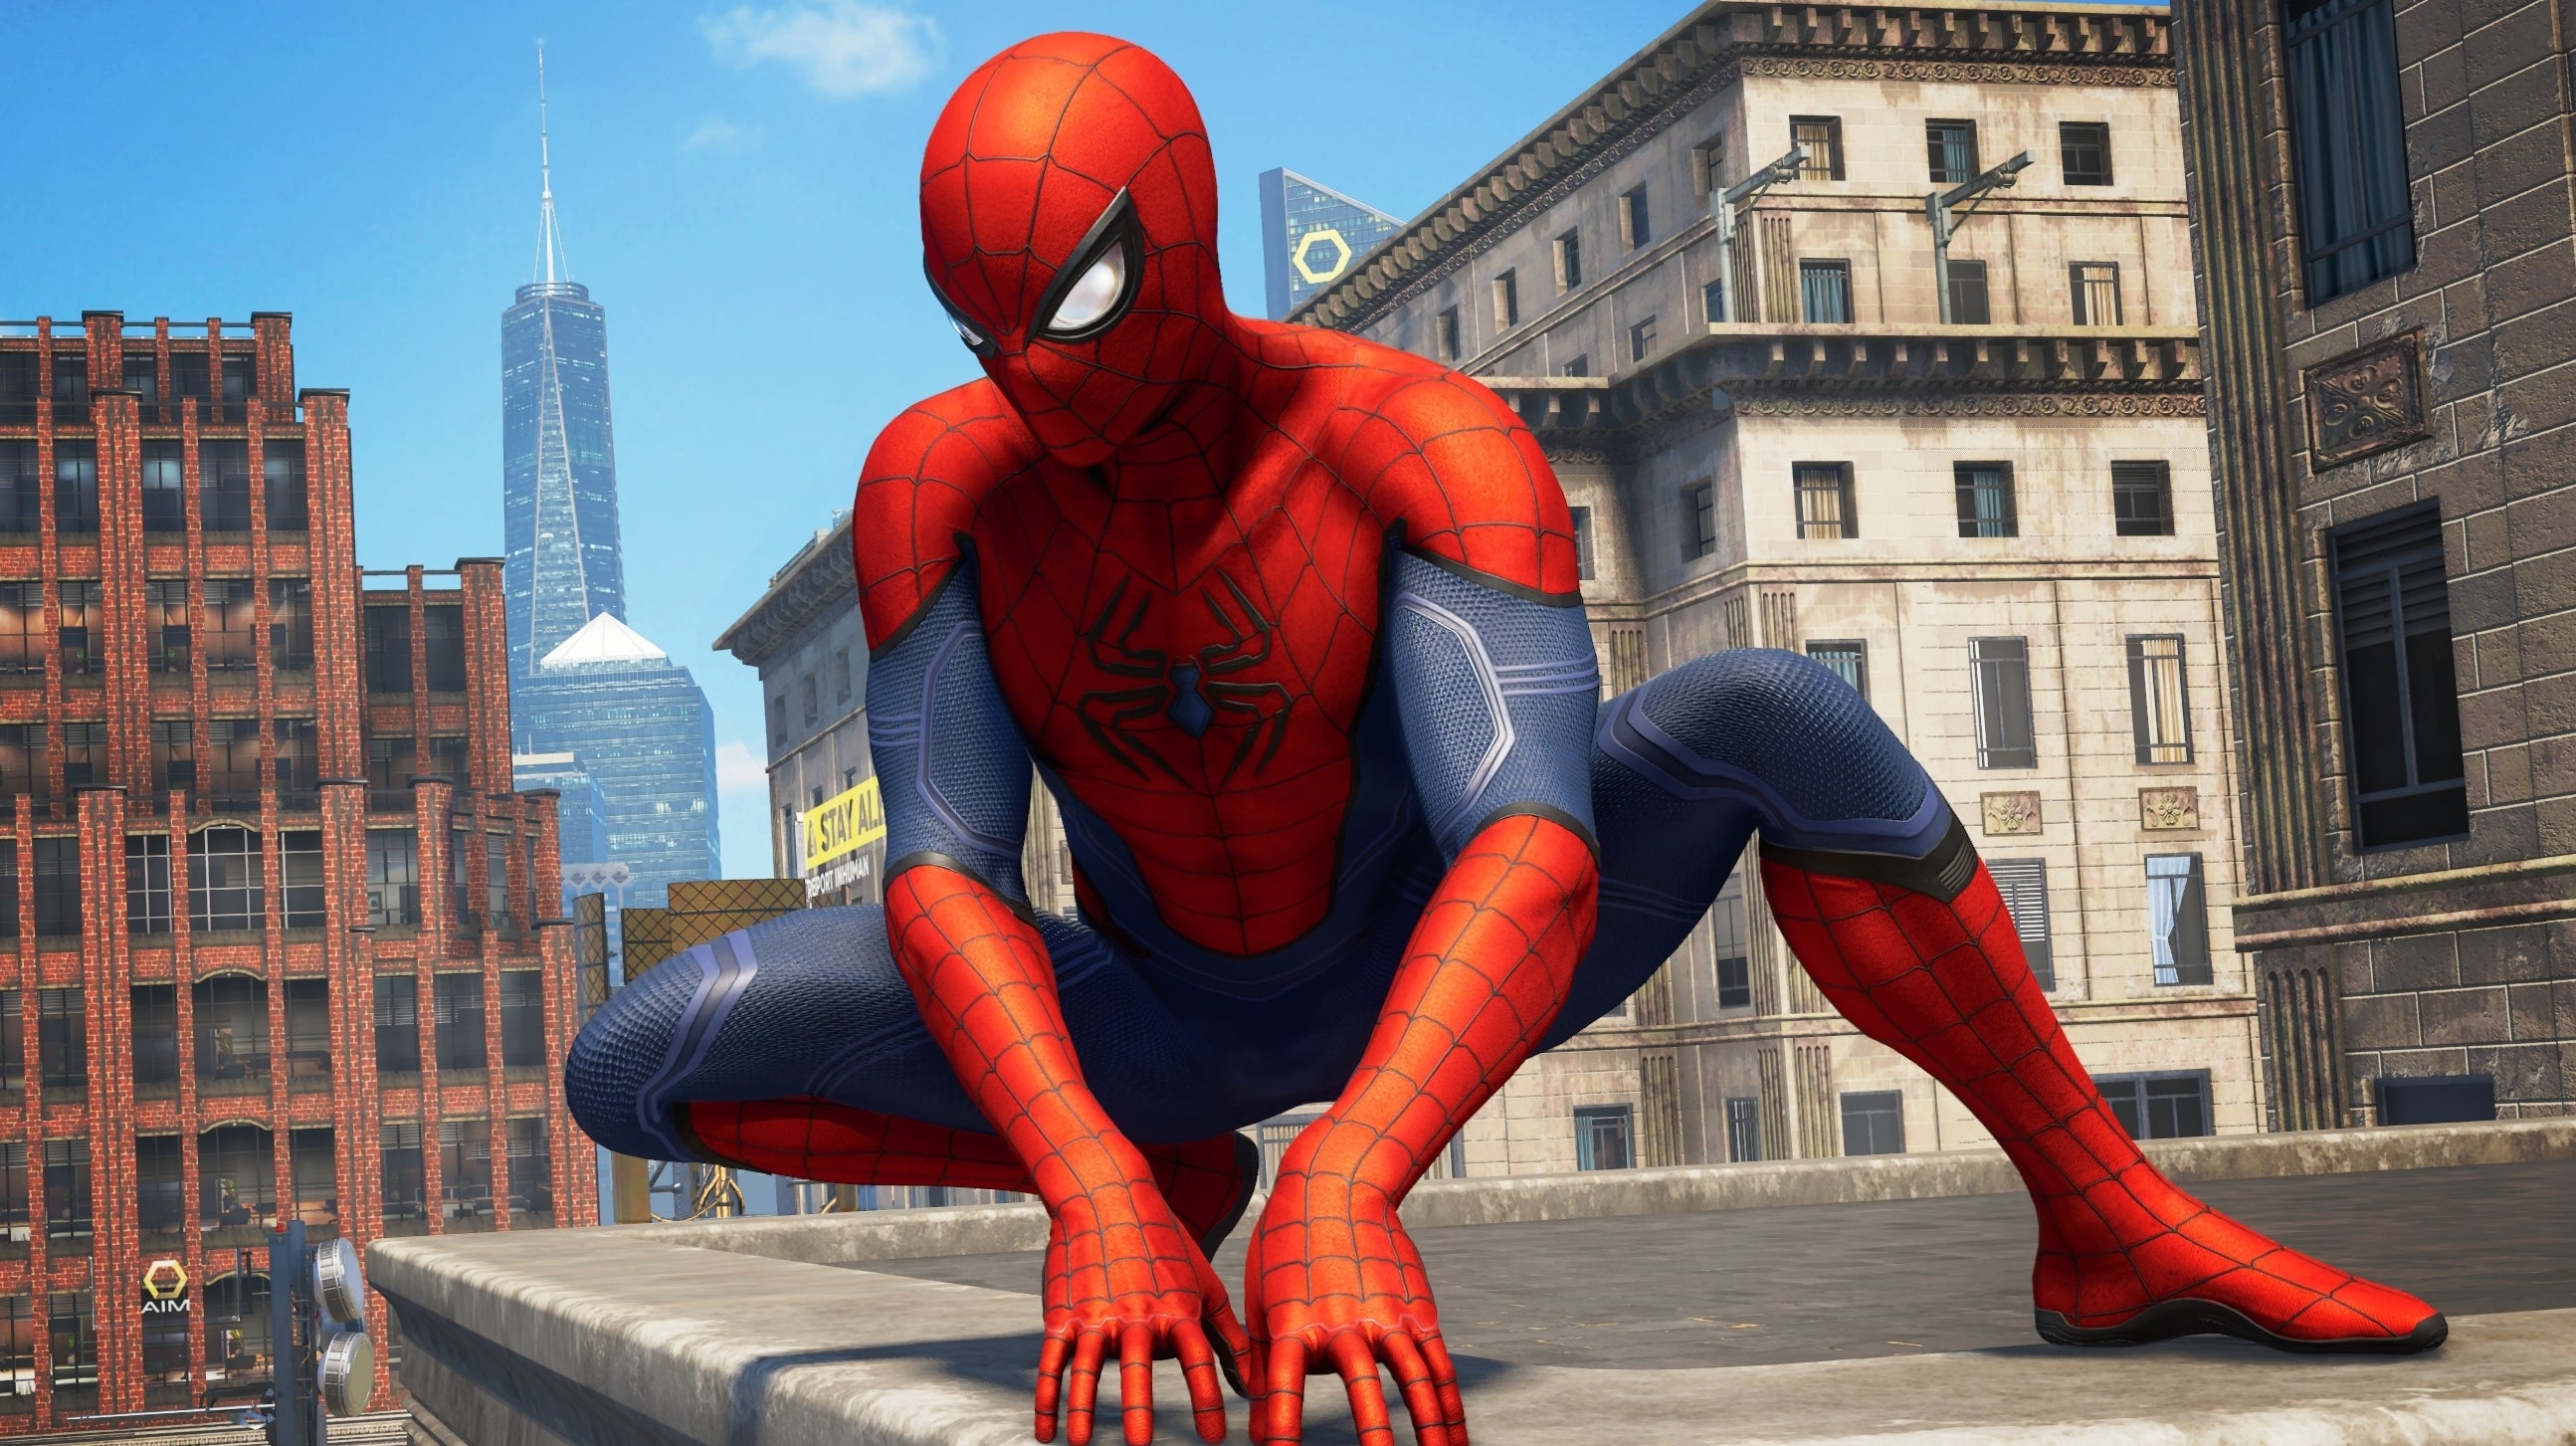 Image for Marvel's Avengers PlayStation-exclusive Spider-Man DLC has no story missions